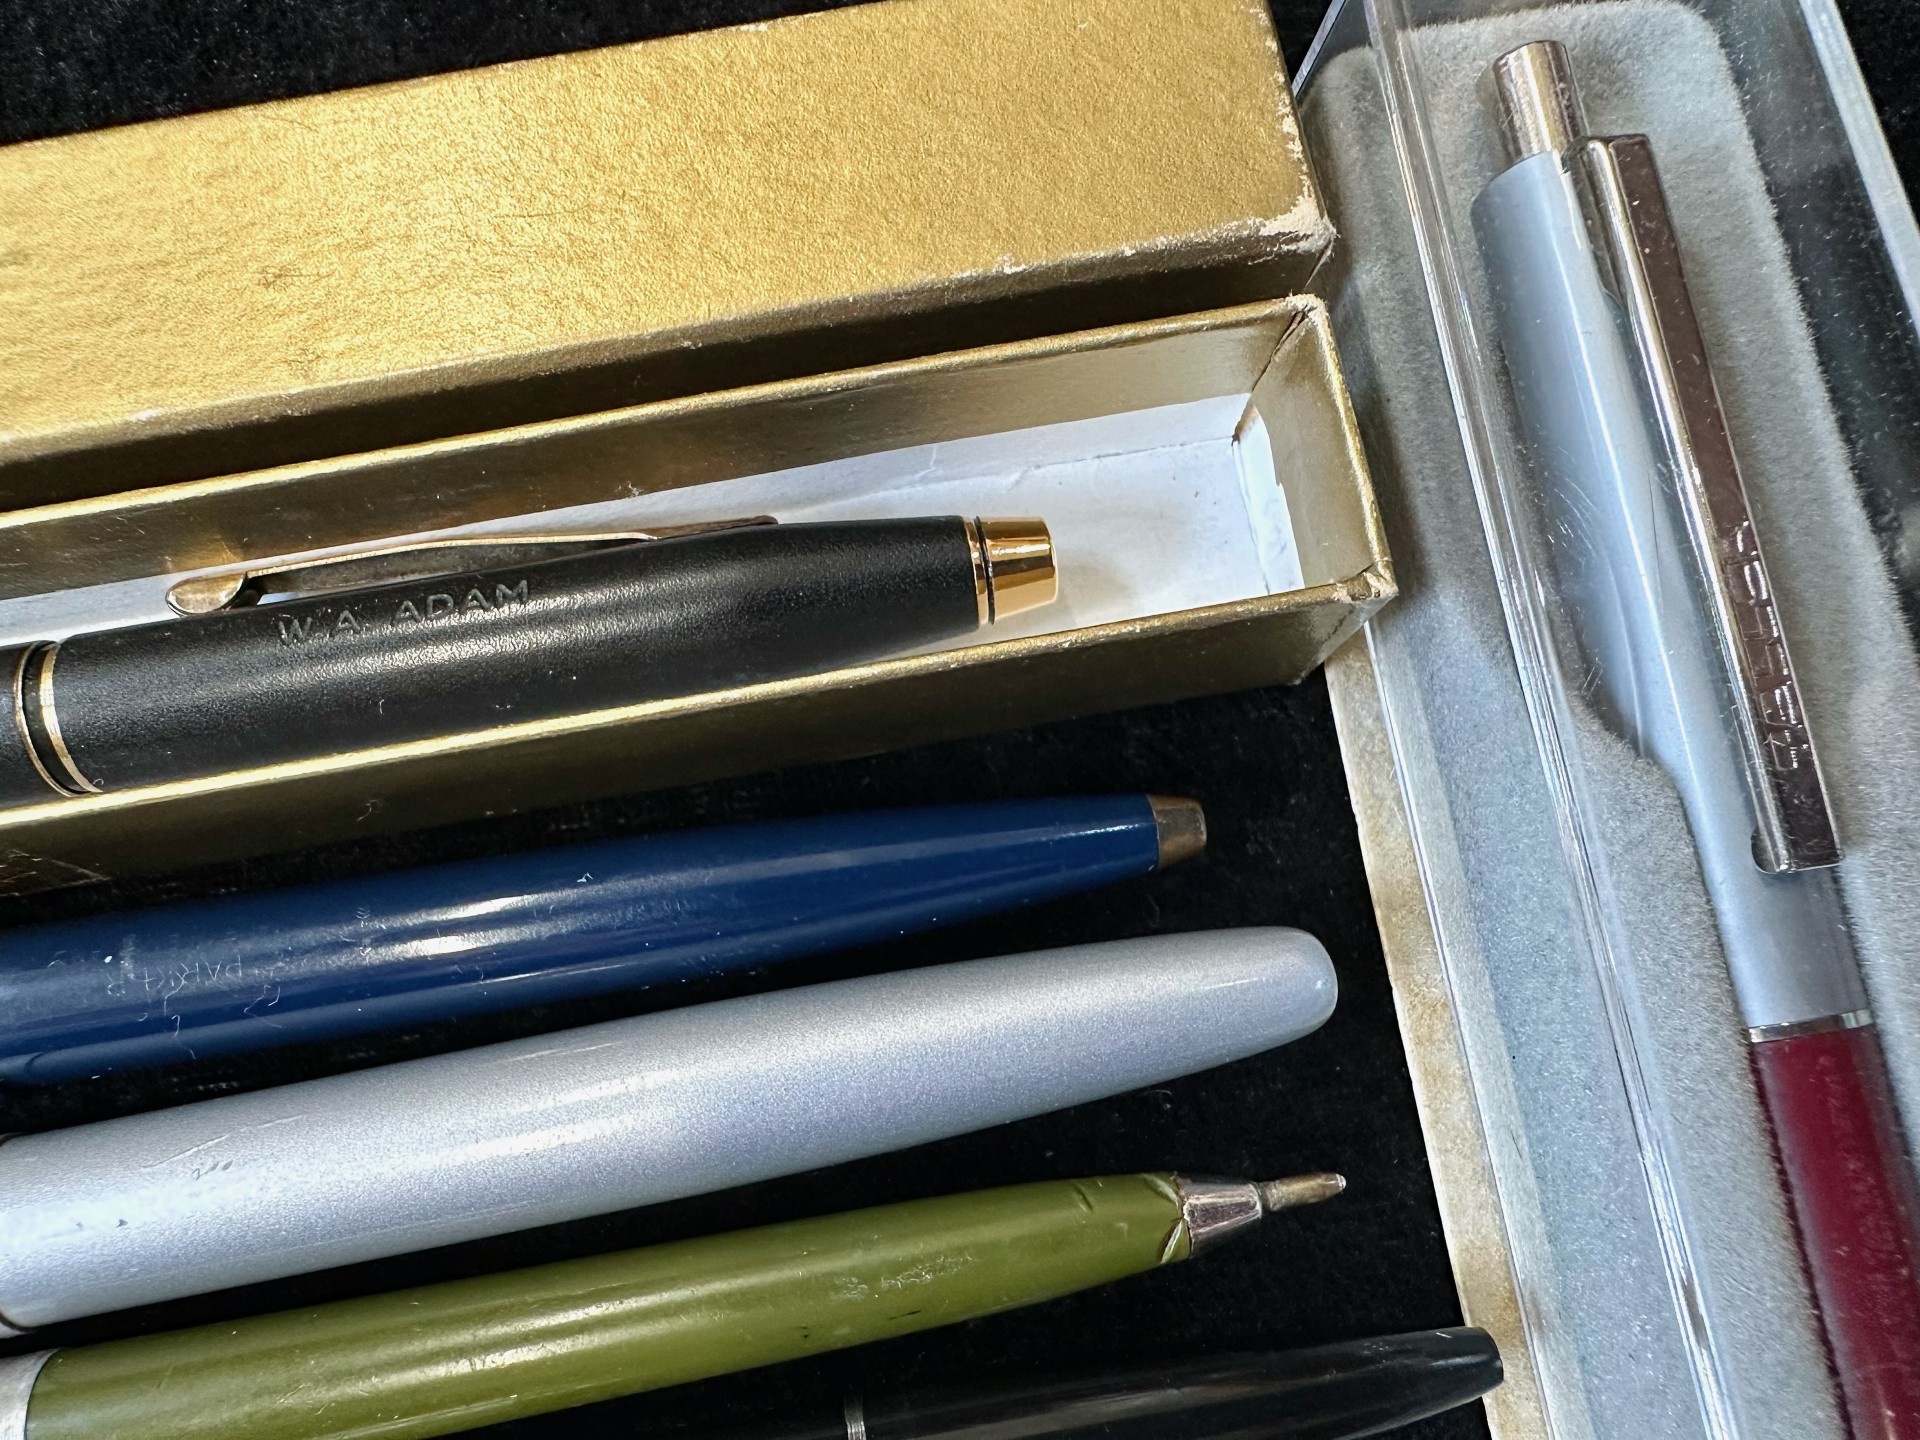 Collection of Vintage Fountain & Ballpoint Pens, including a Cross black fountain pen in original - Image 3 of 3